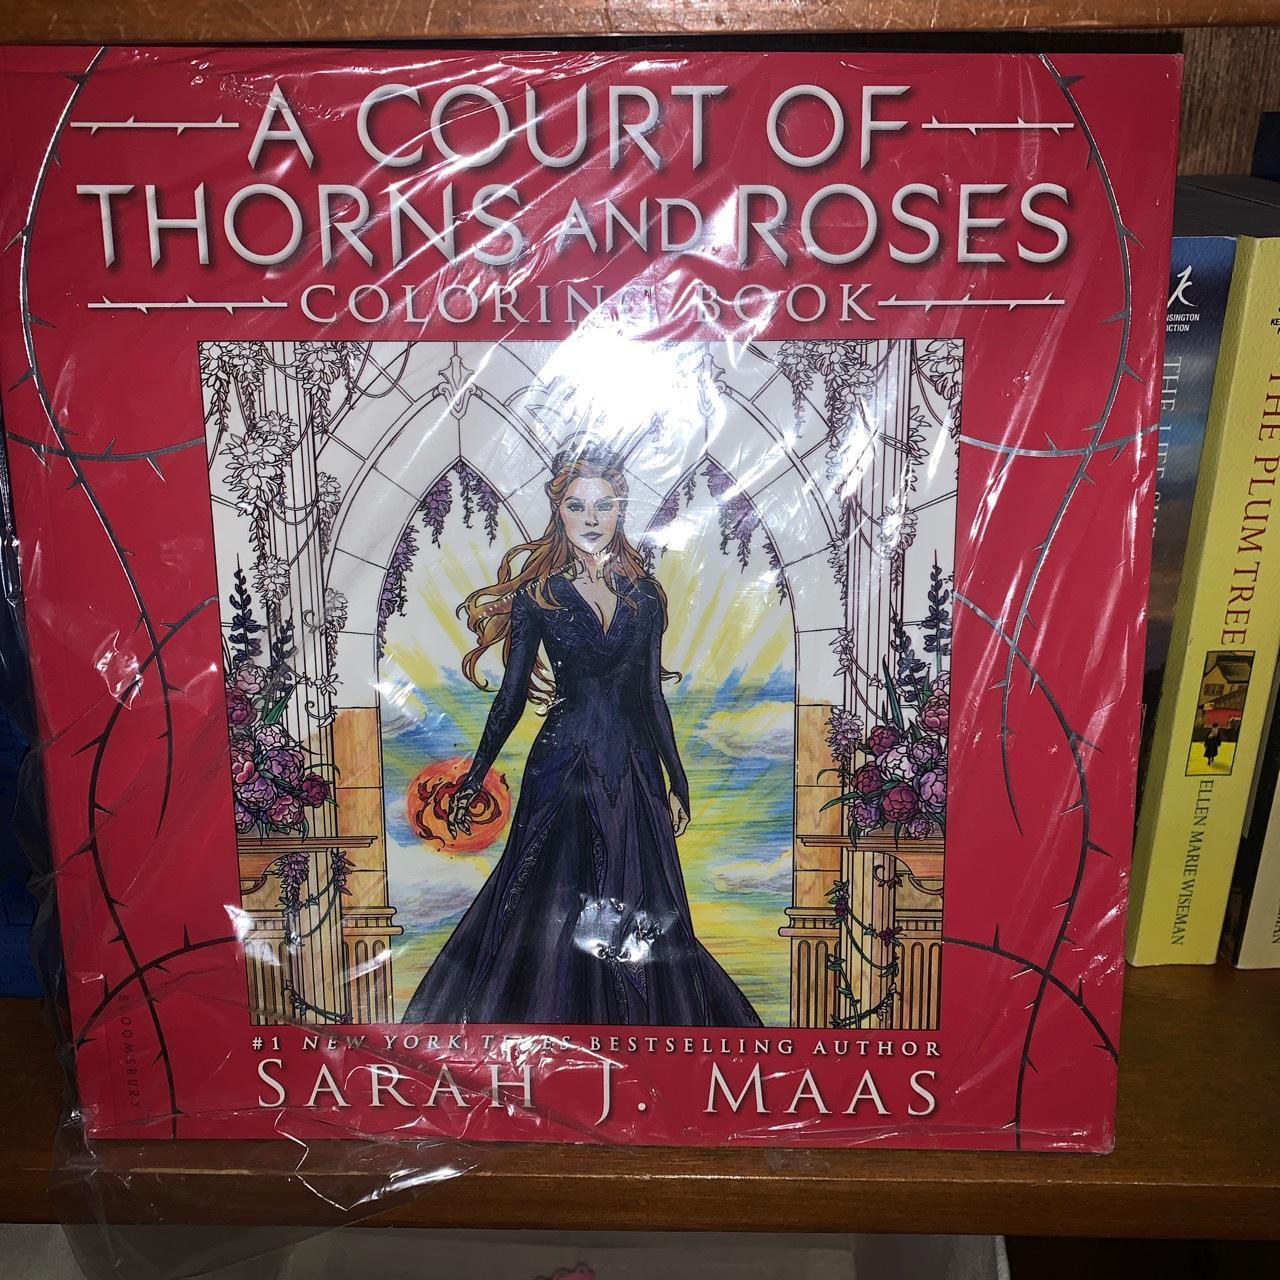 A Court of Thorns and Roses coloring book